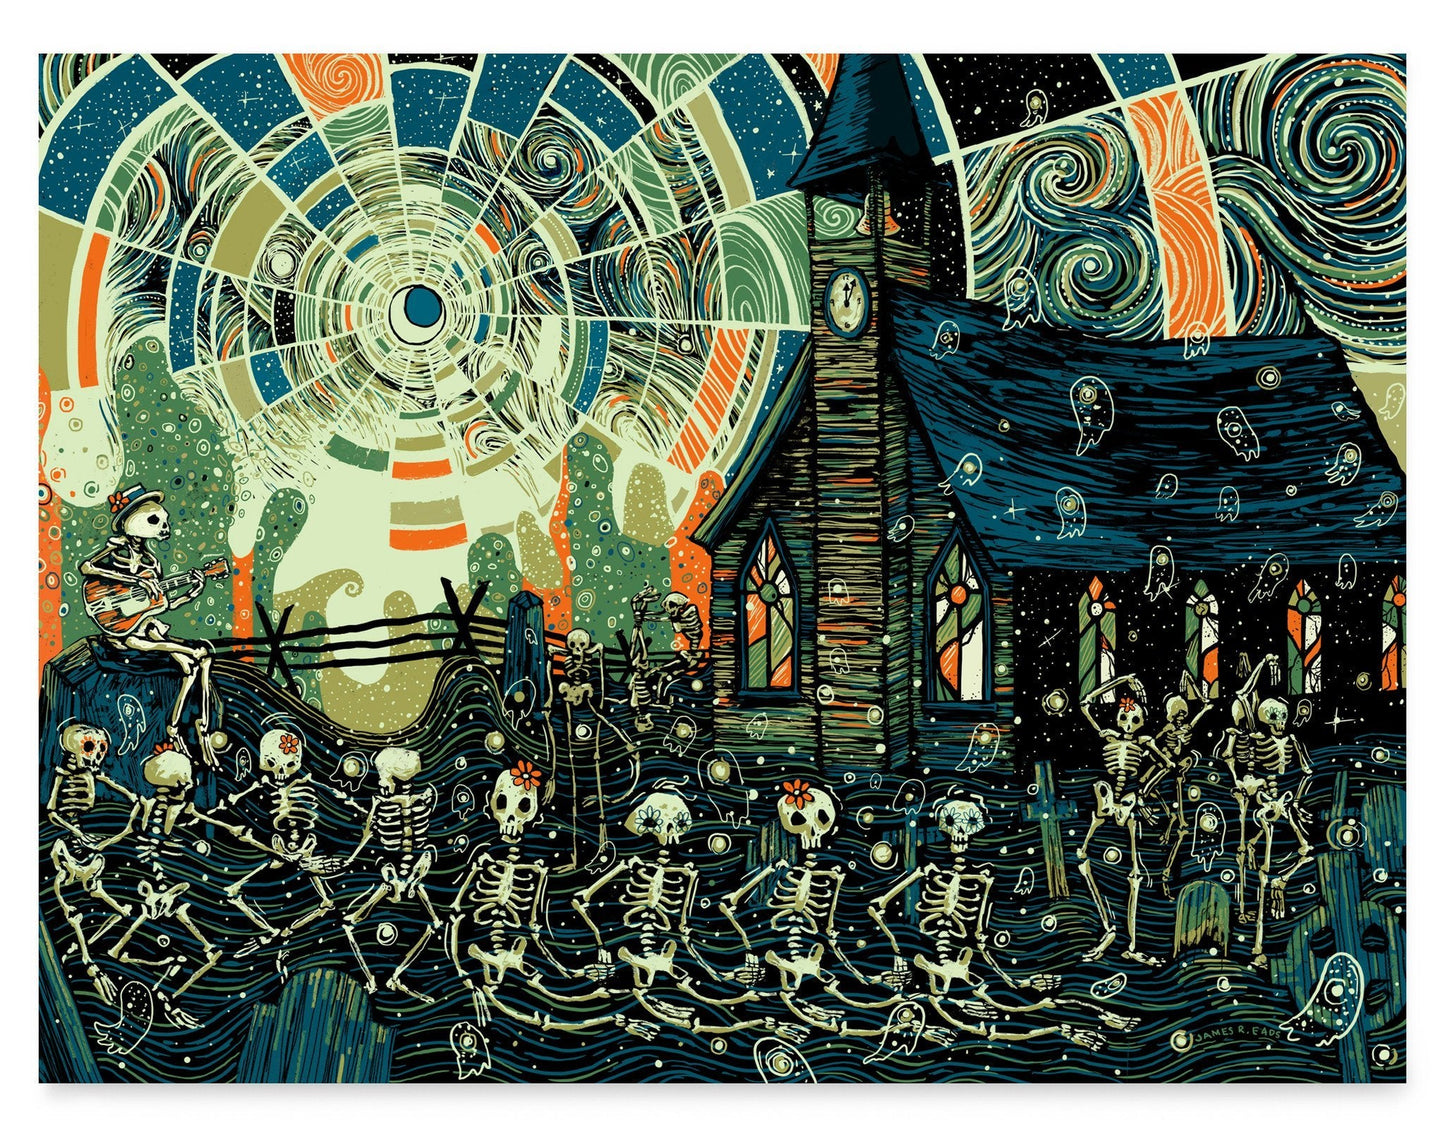 The Skully Mambo II (Limited Edition of 75) James R. Eads